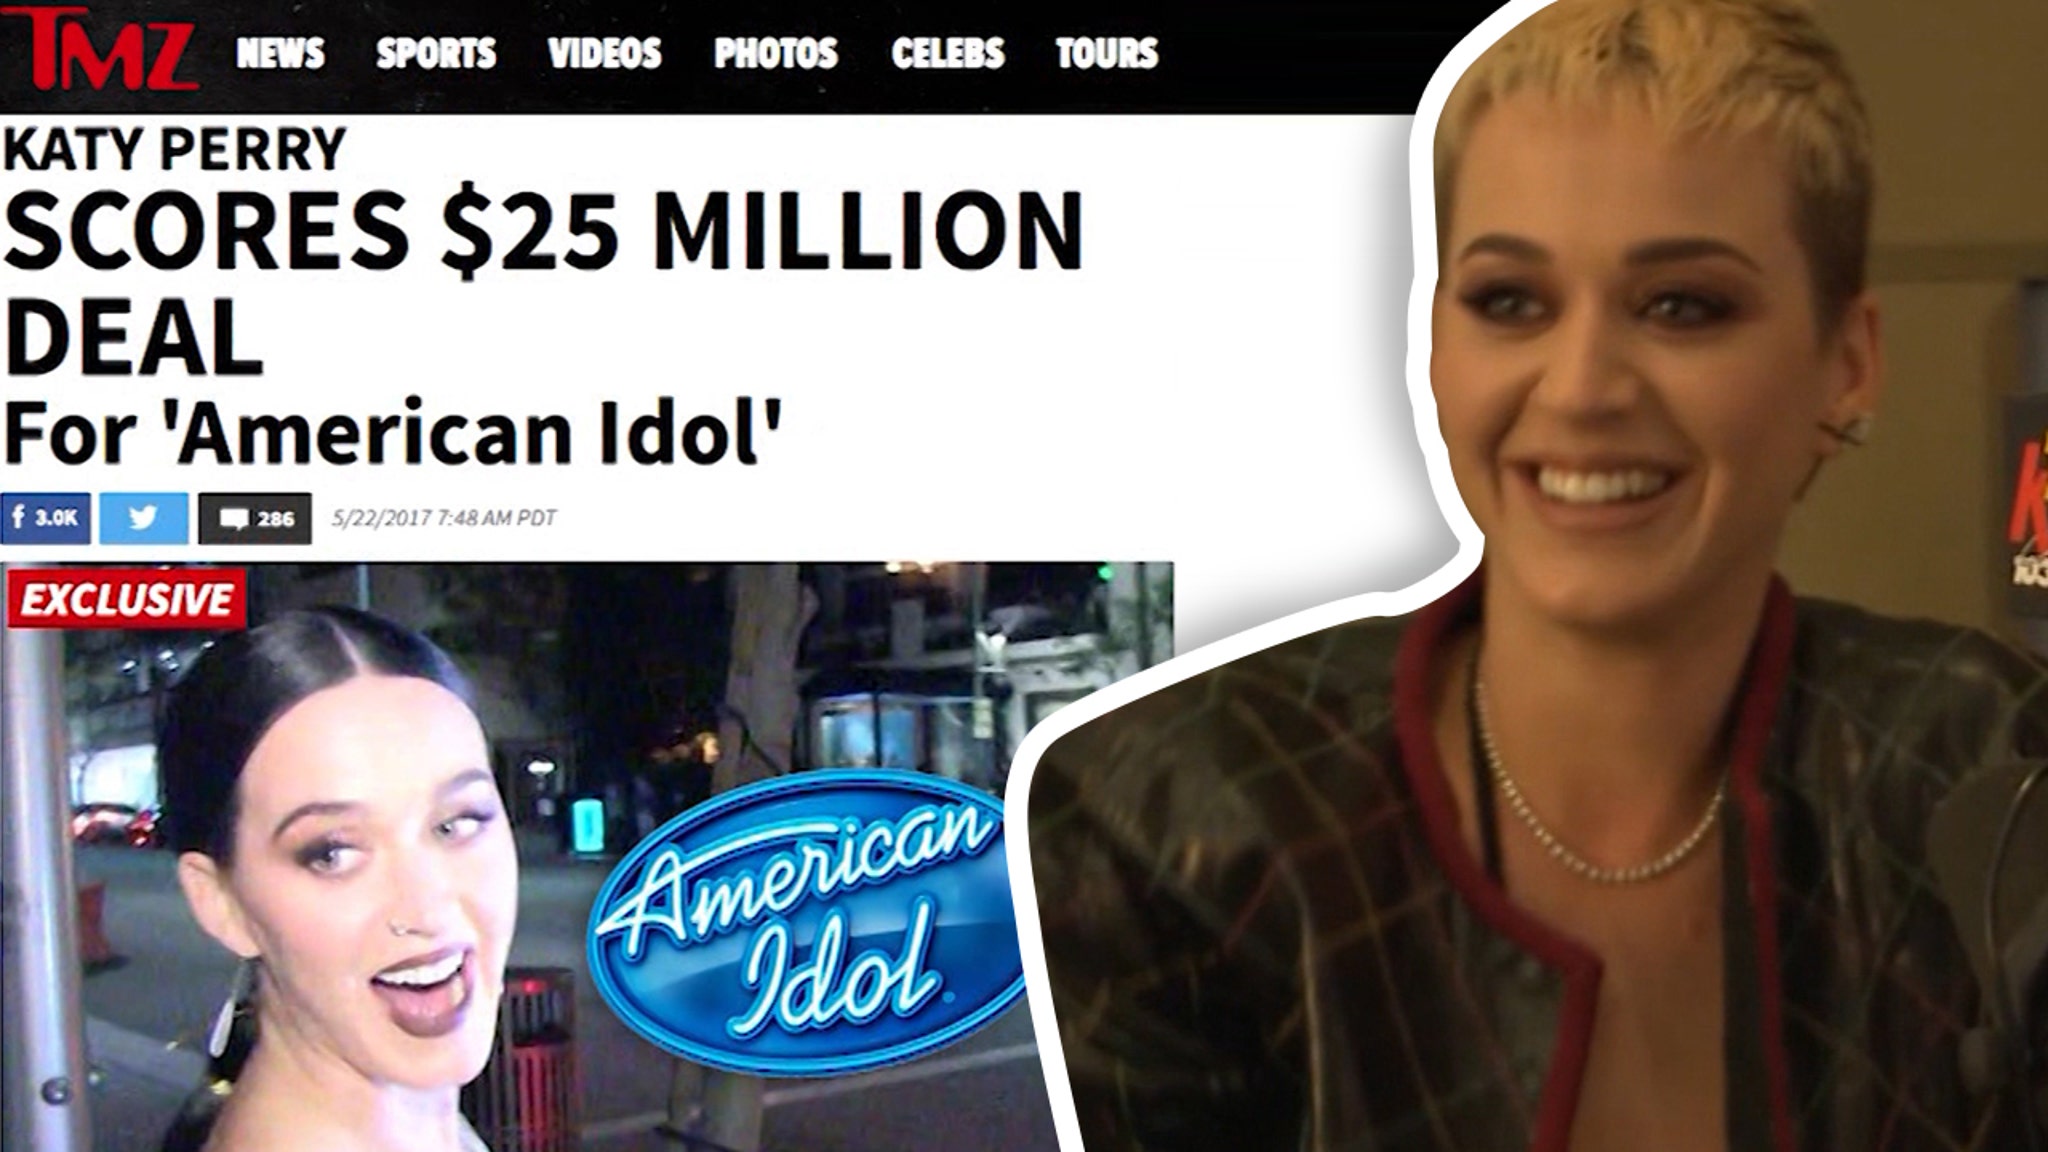 Katy Perry Says She Proud Of The Big Money She's Making On 'American Idol'